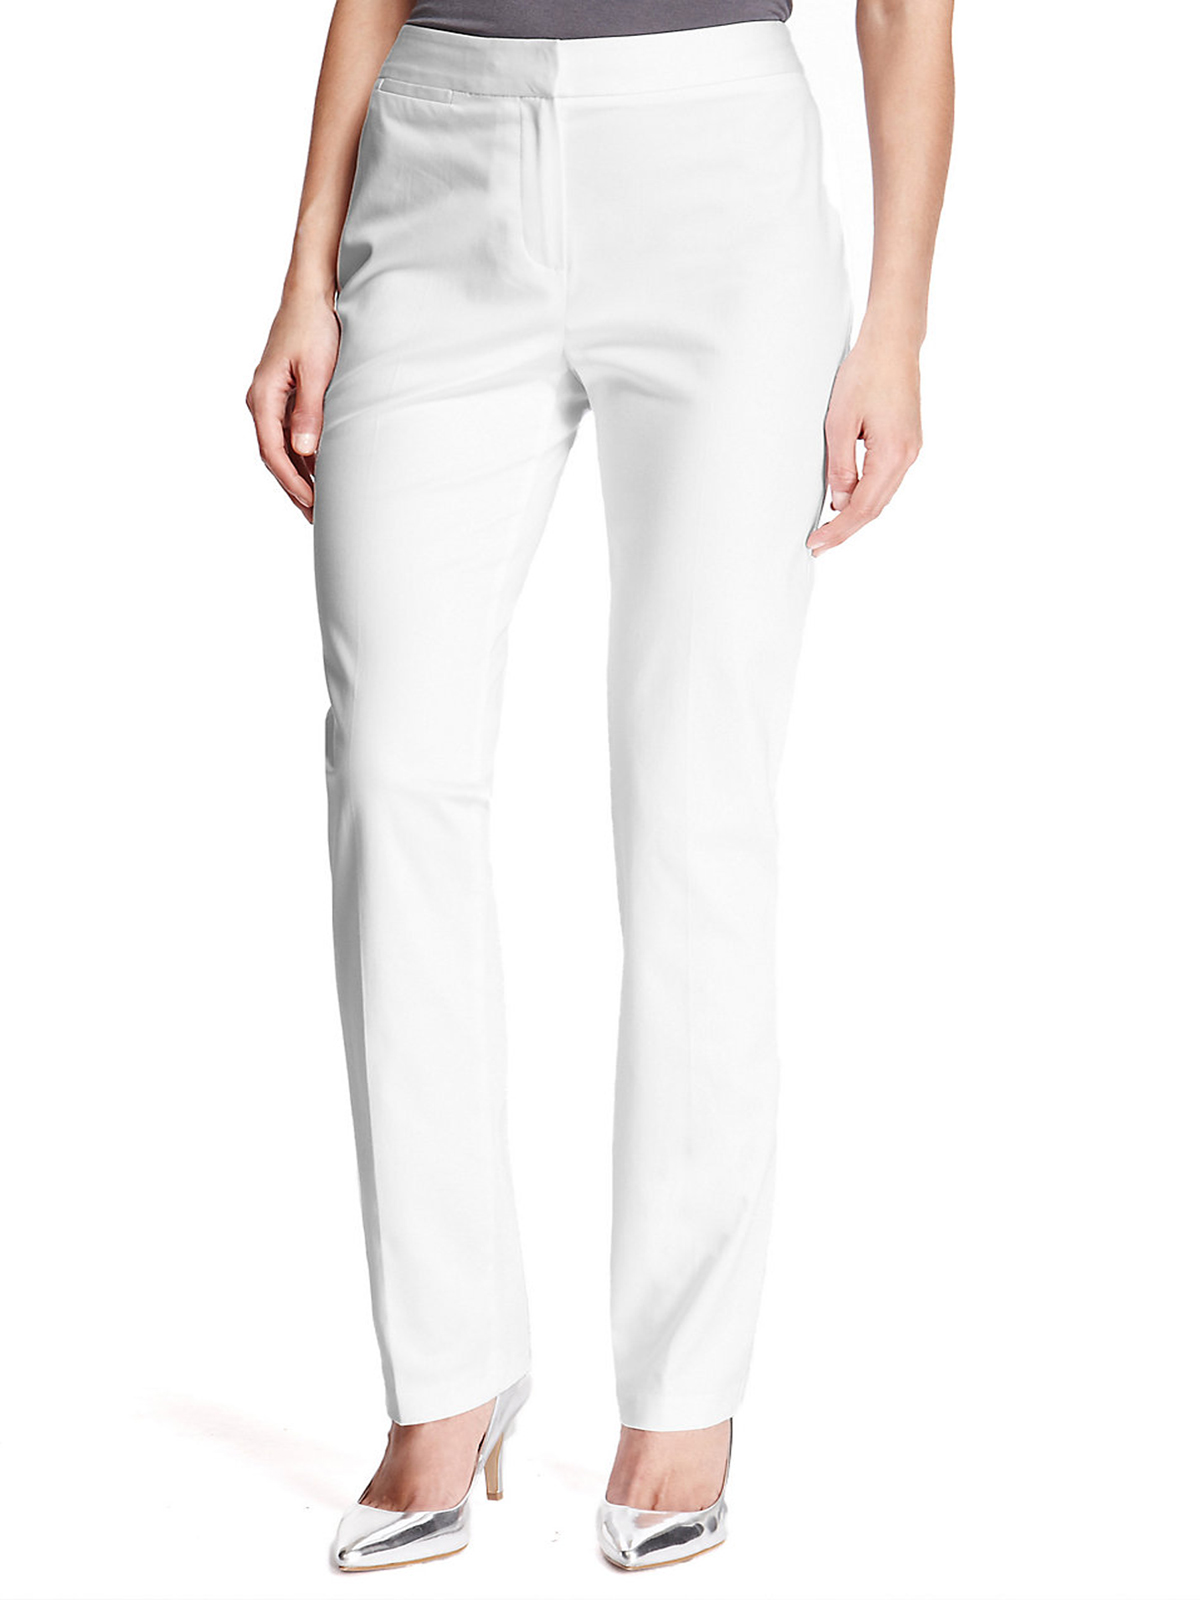 Marks and Spencer - - M&5 WHITE Cotton Rich Modern Slim Leg Trousers ...